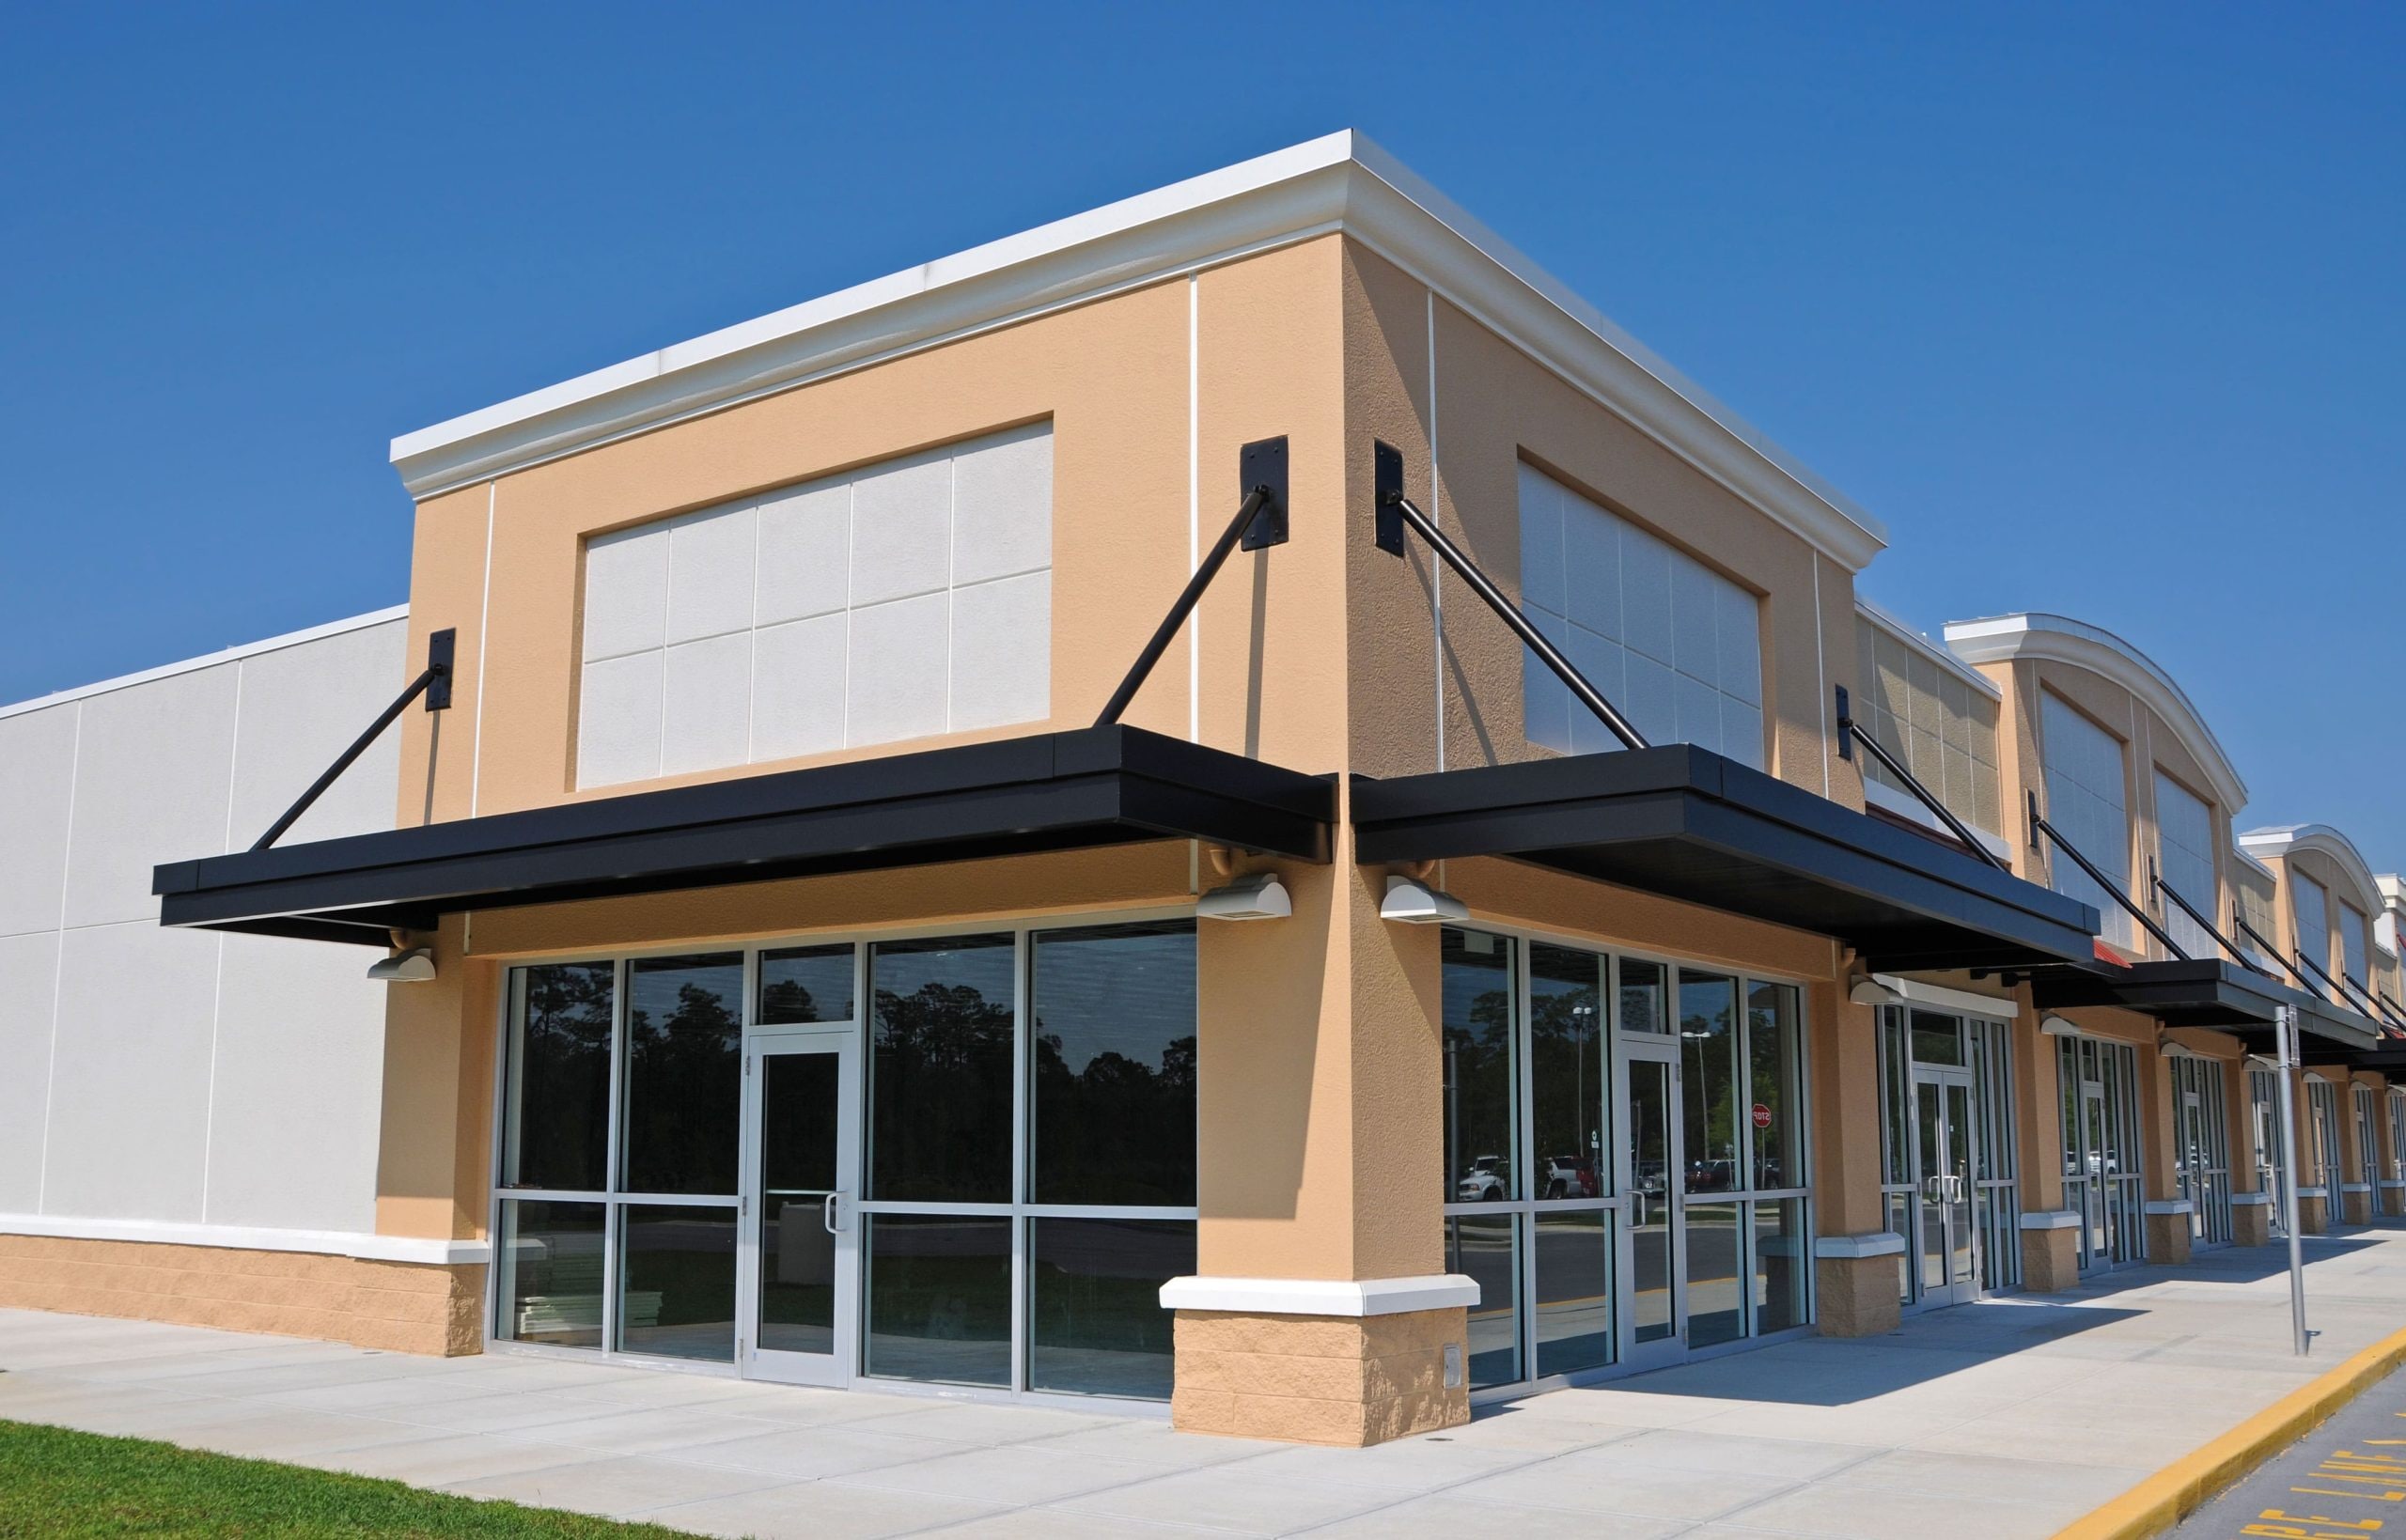 Commercial Awning Service in Akron